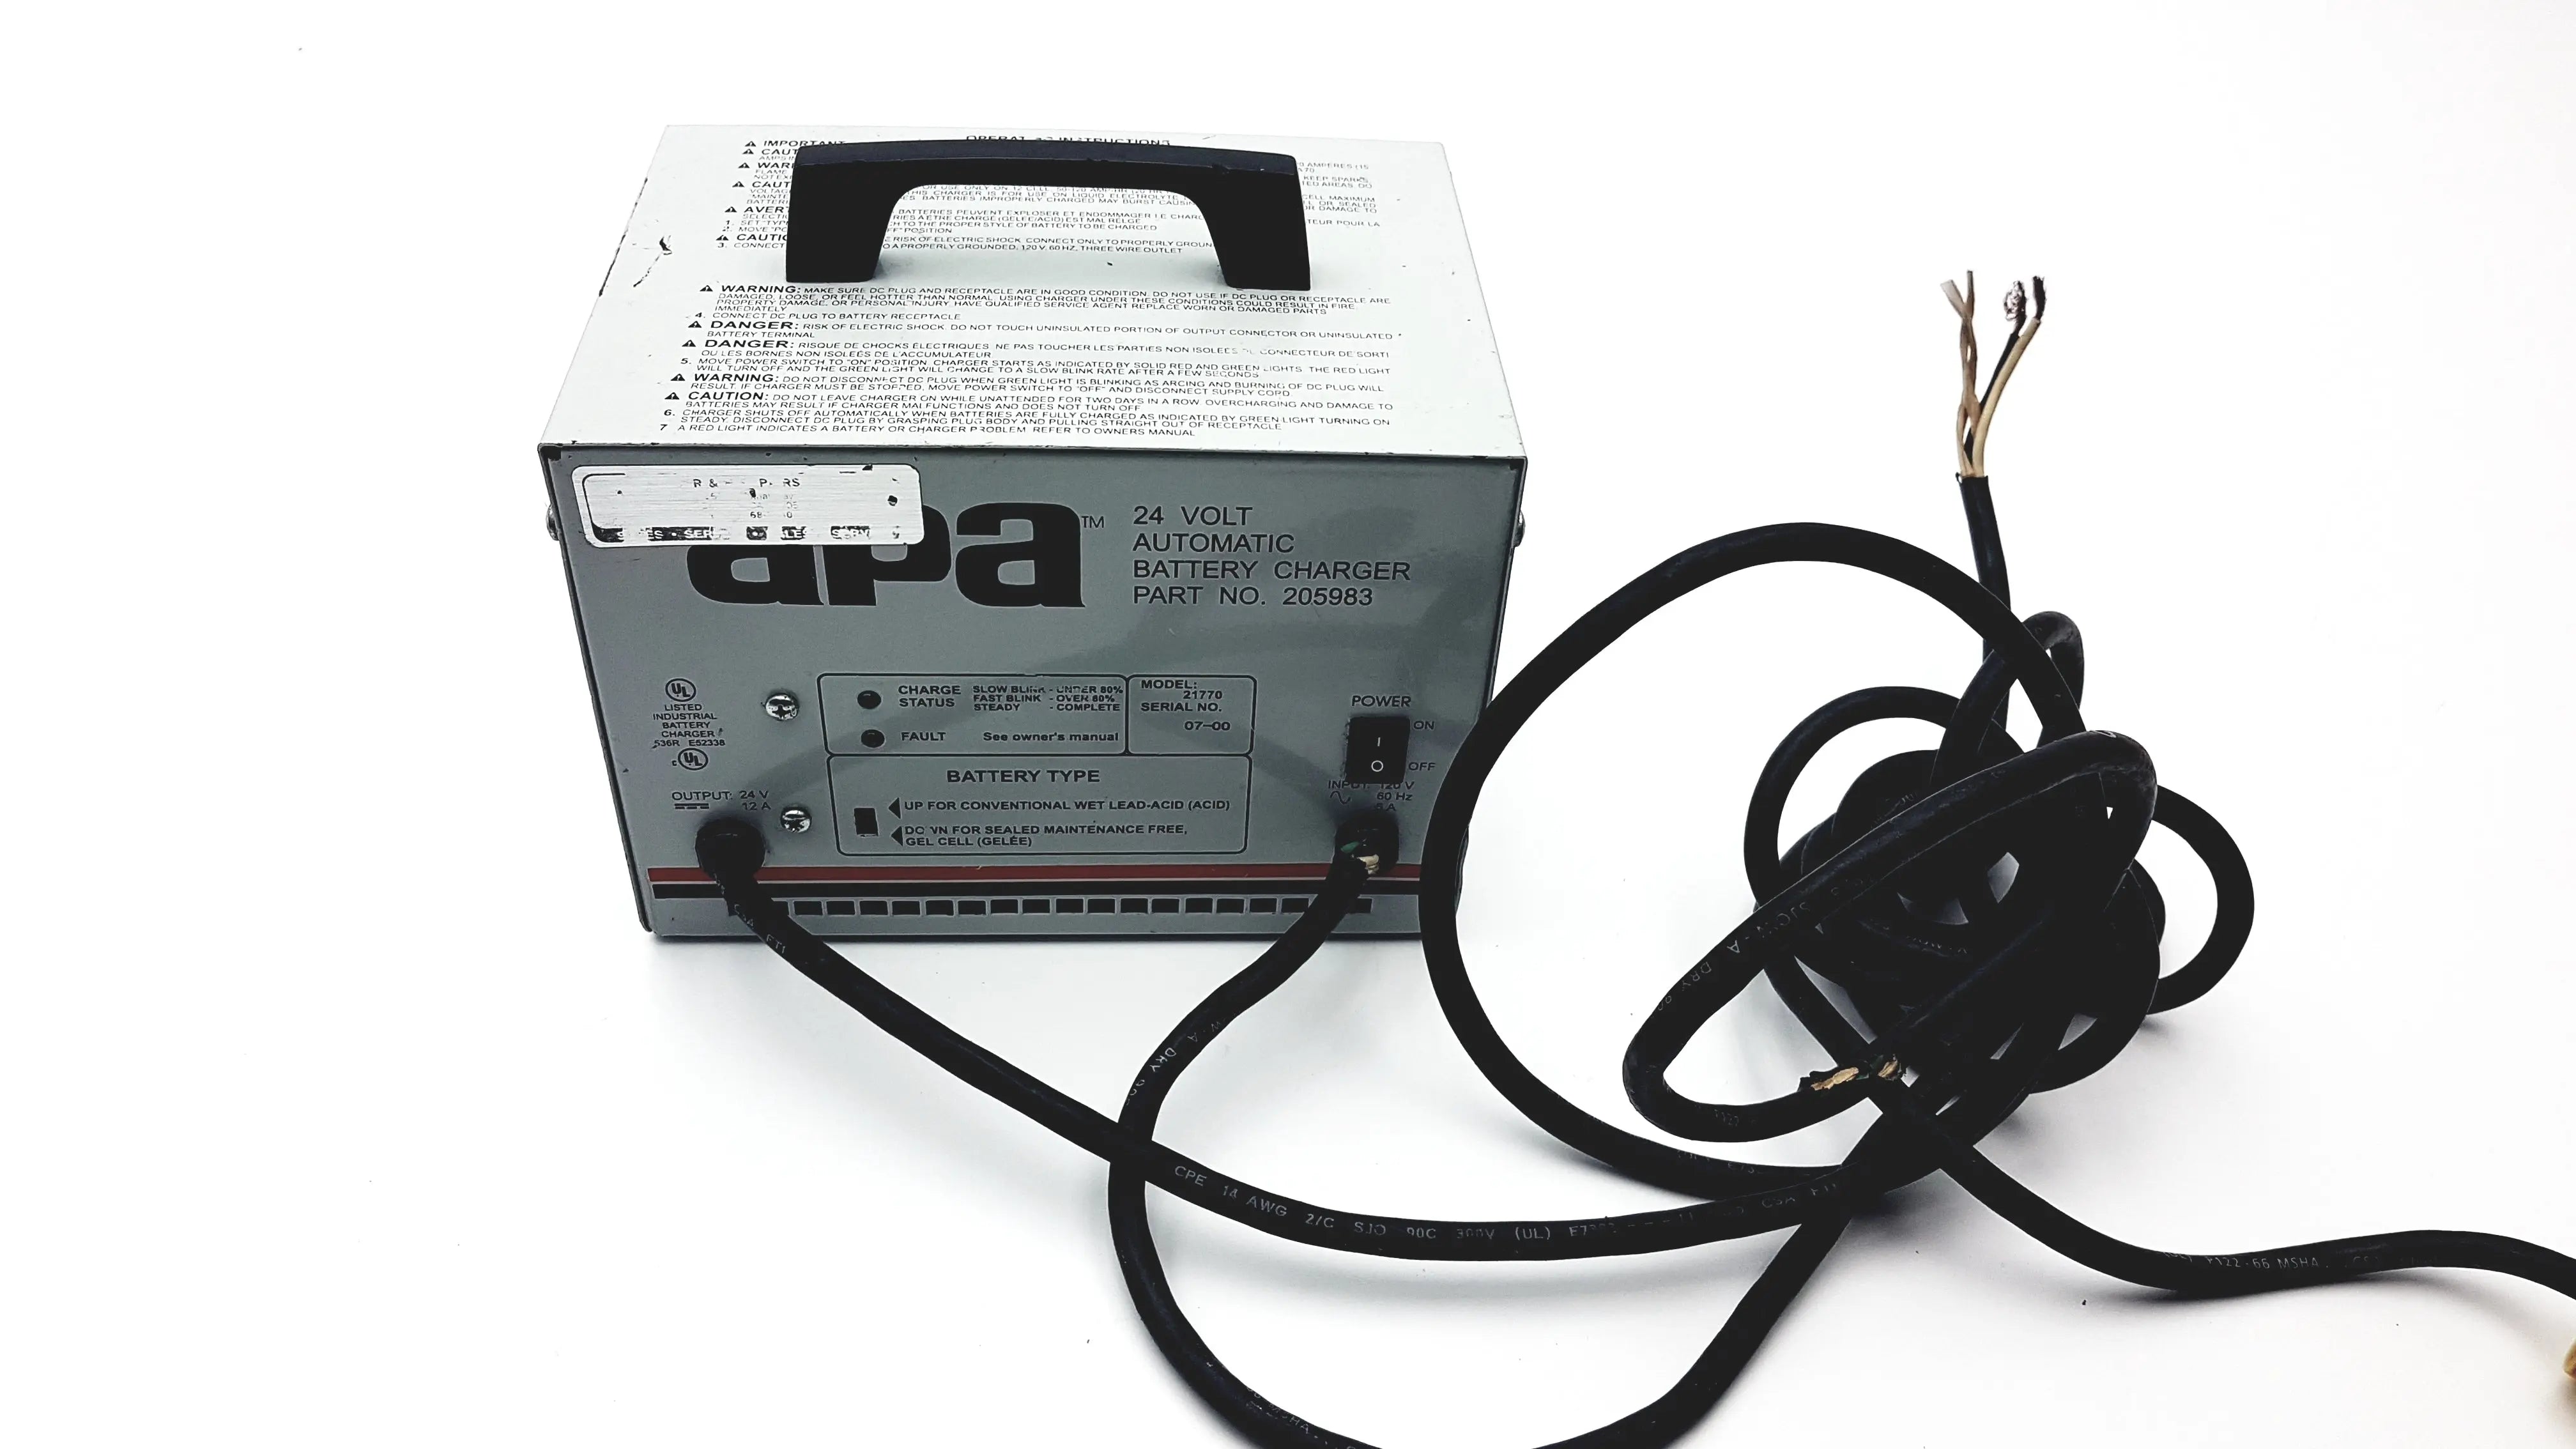 Load image into Gallery viewer, A Biomedical Service APA 24 Volt Automatic Battery Charger 205983 